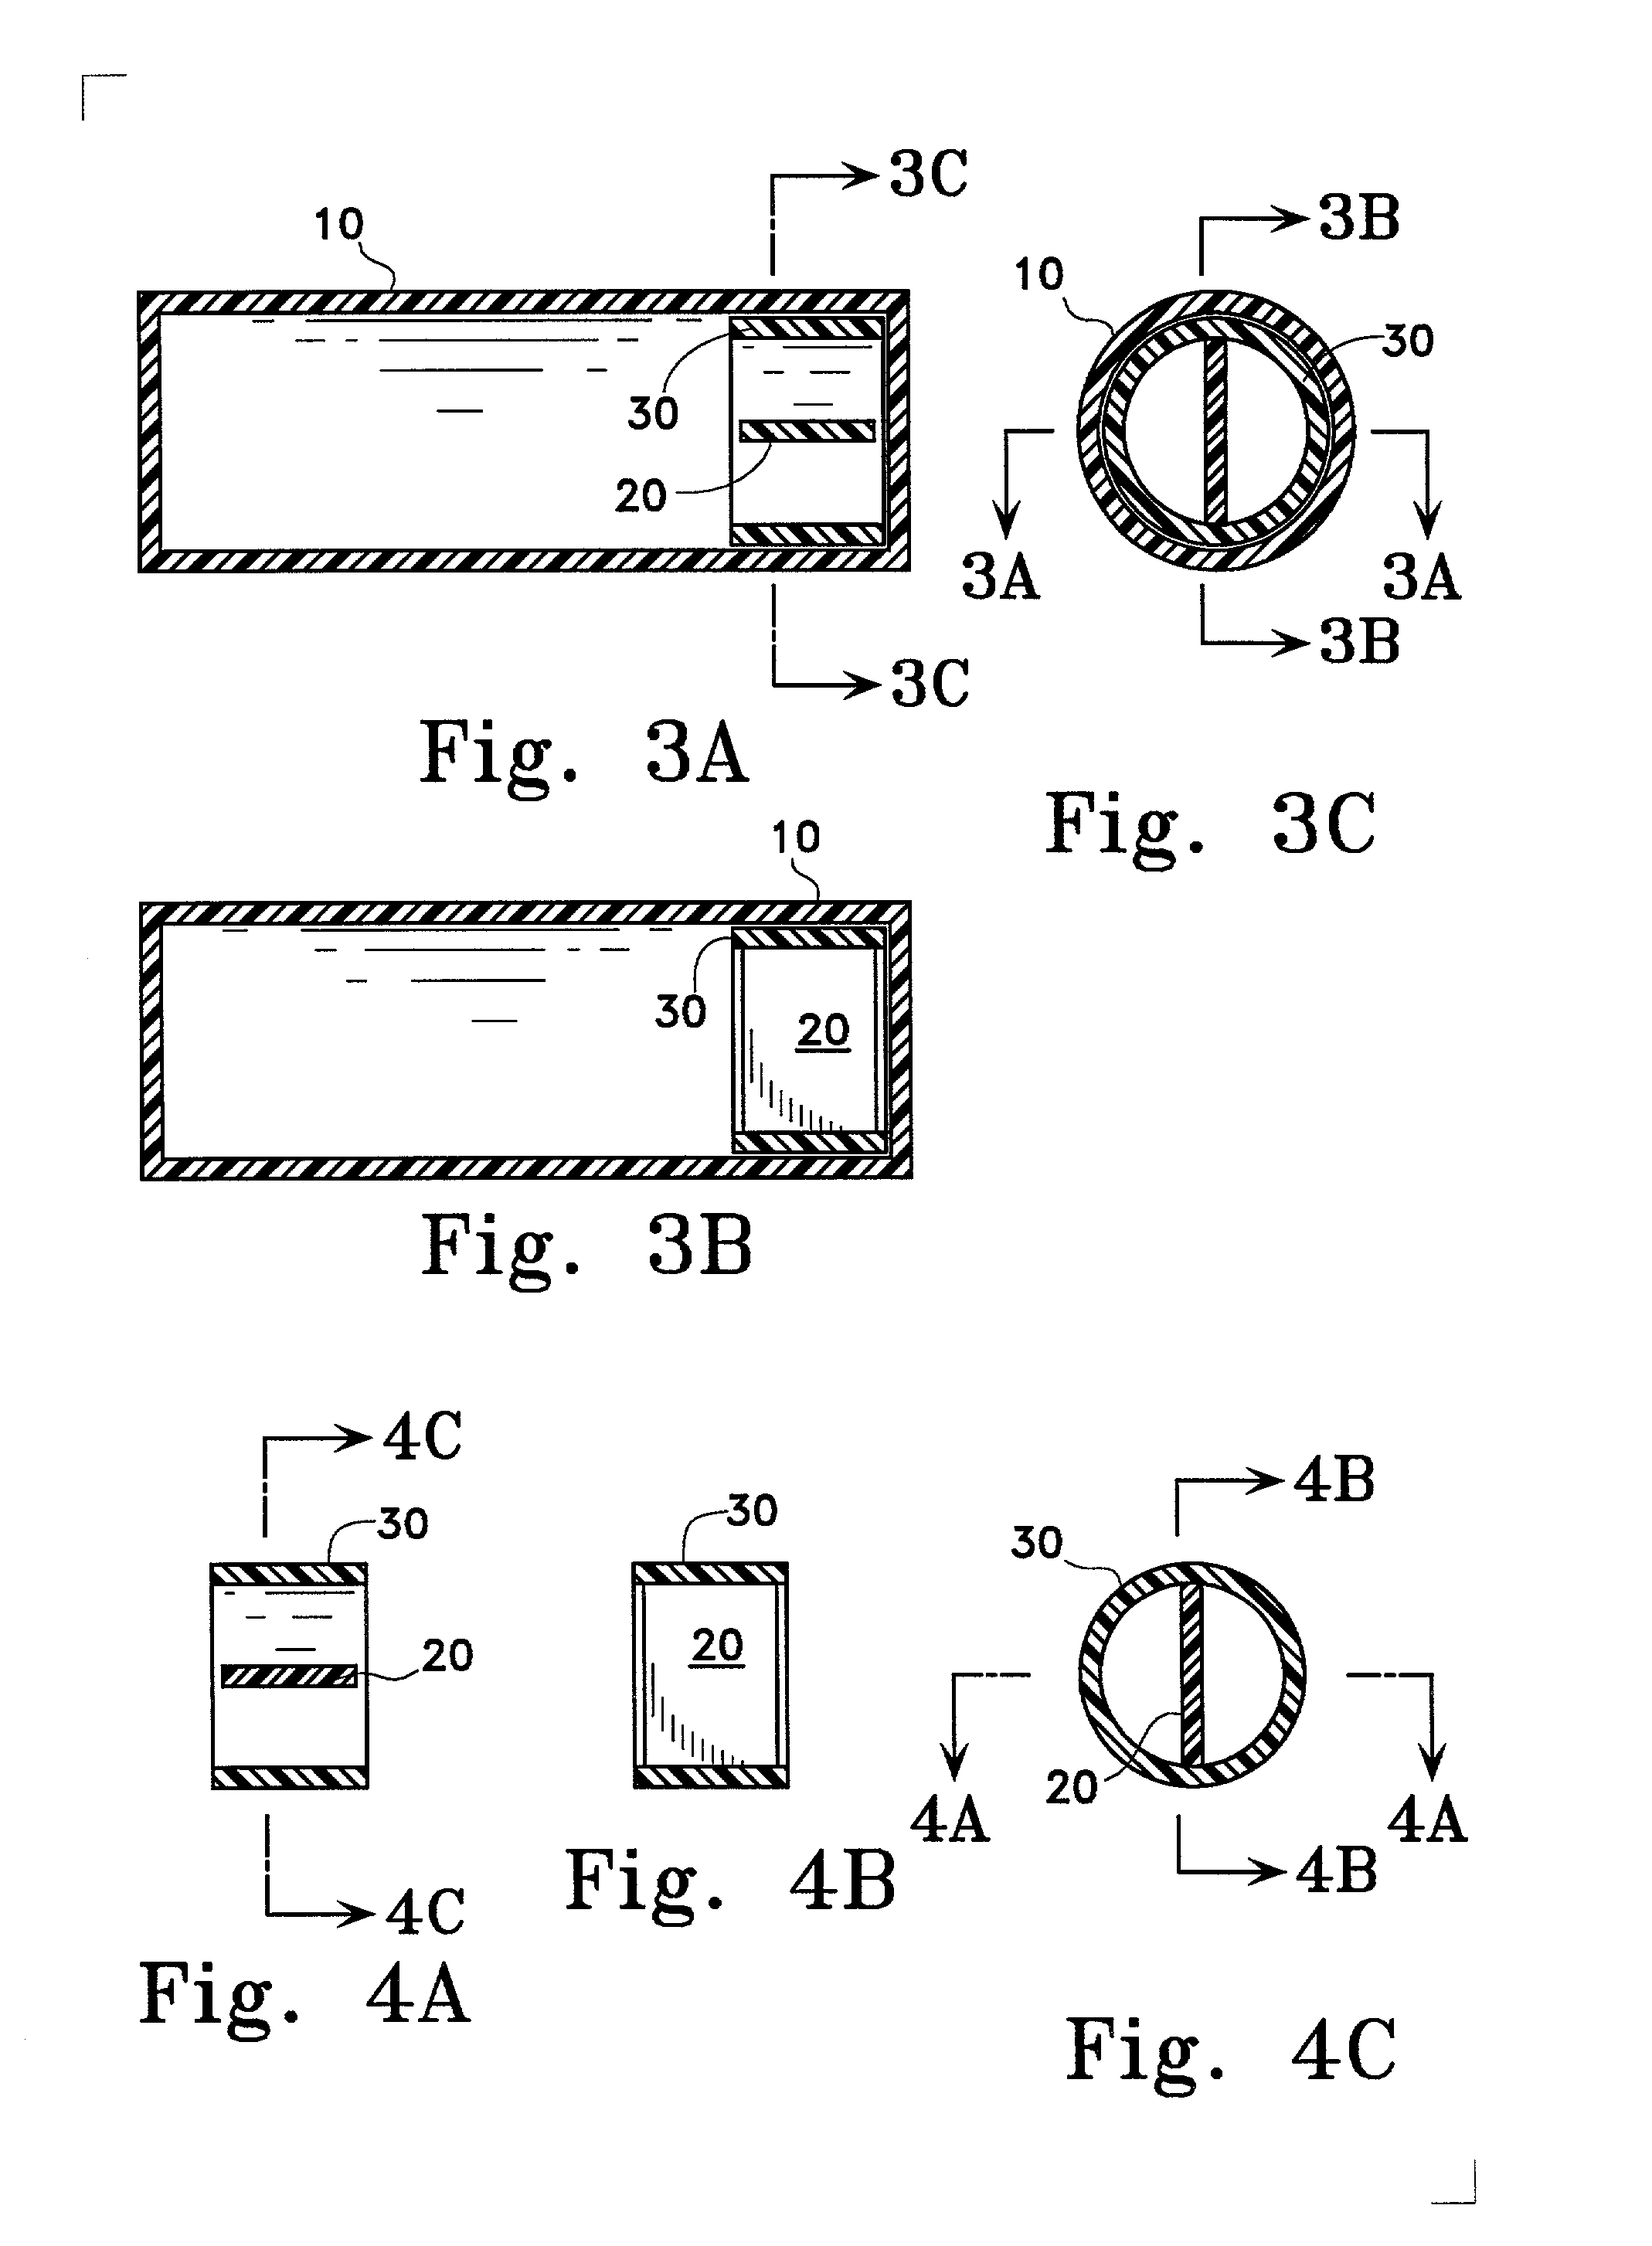 Electronic tag device